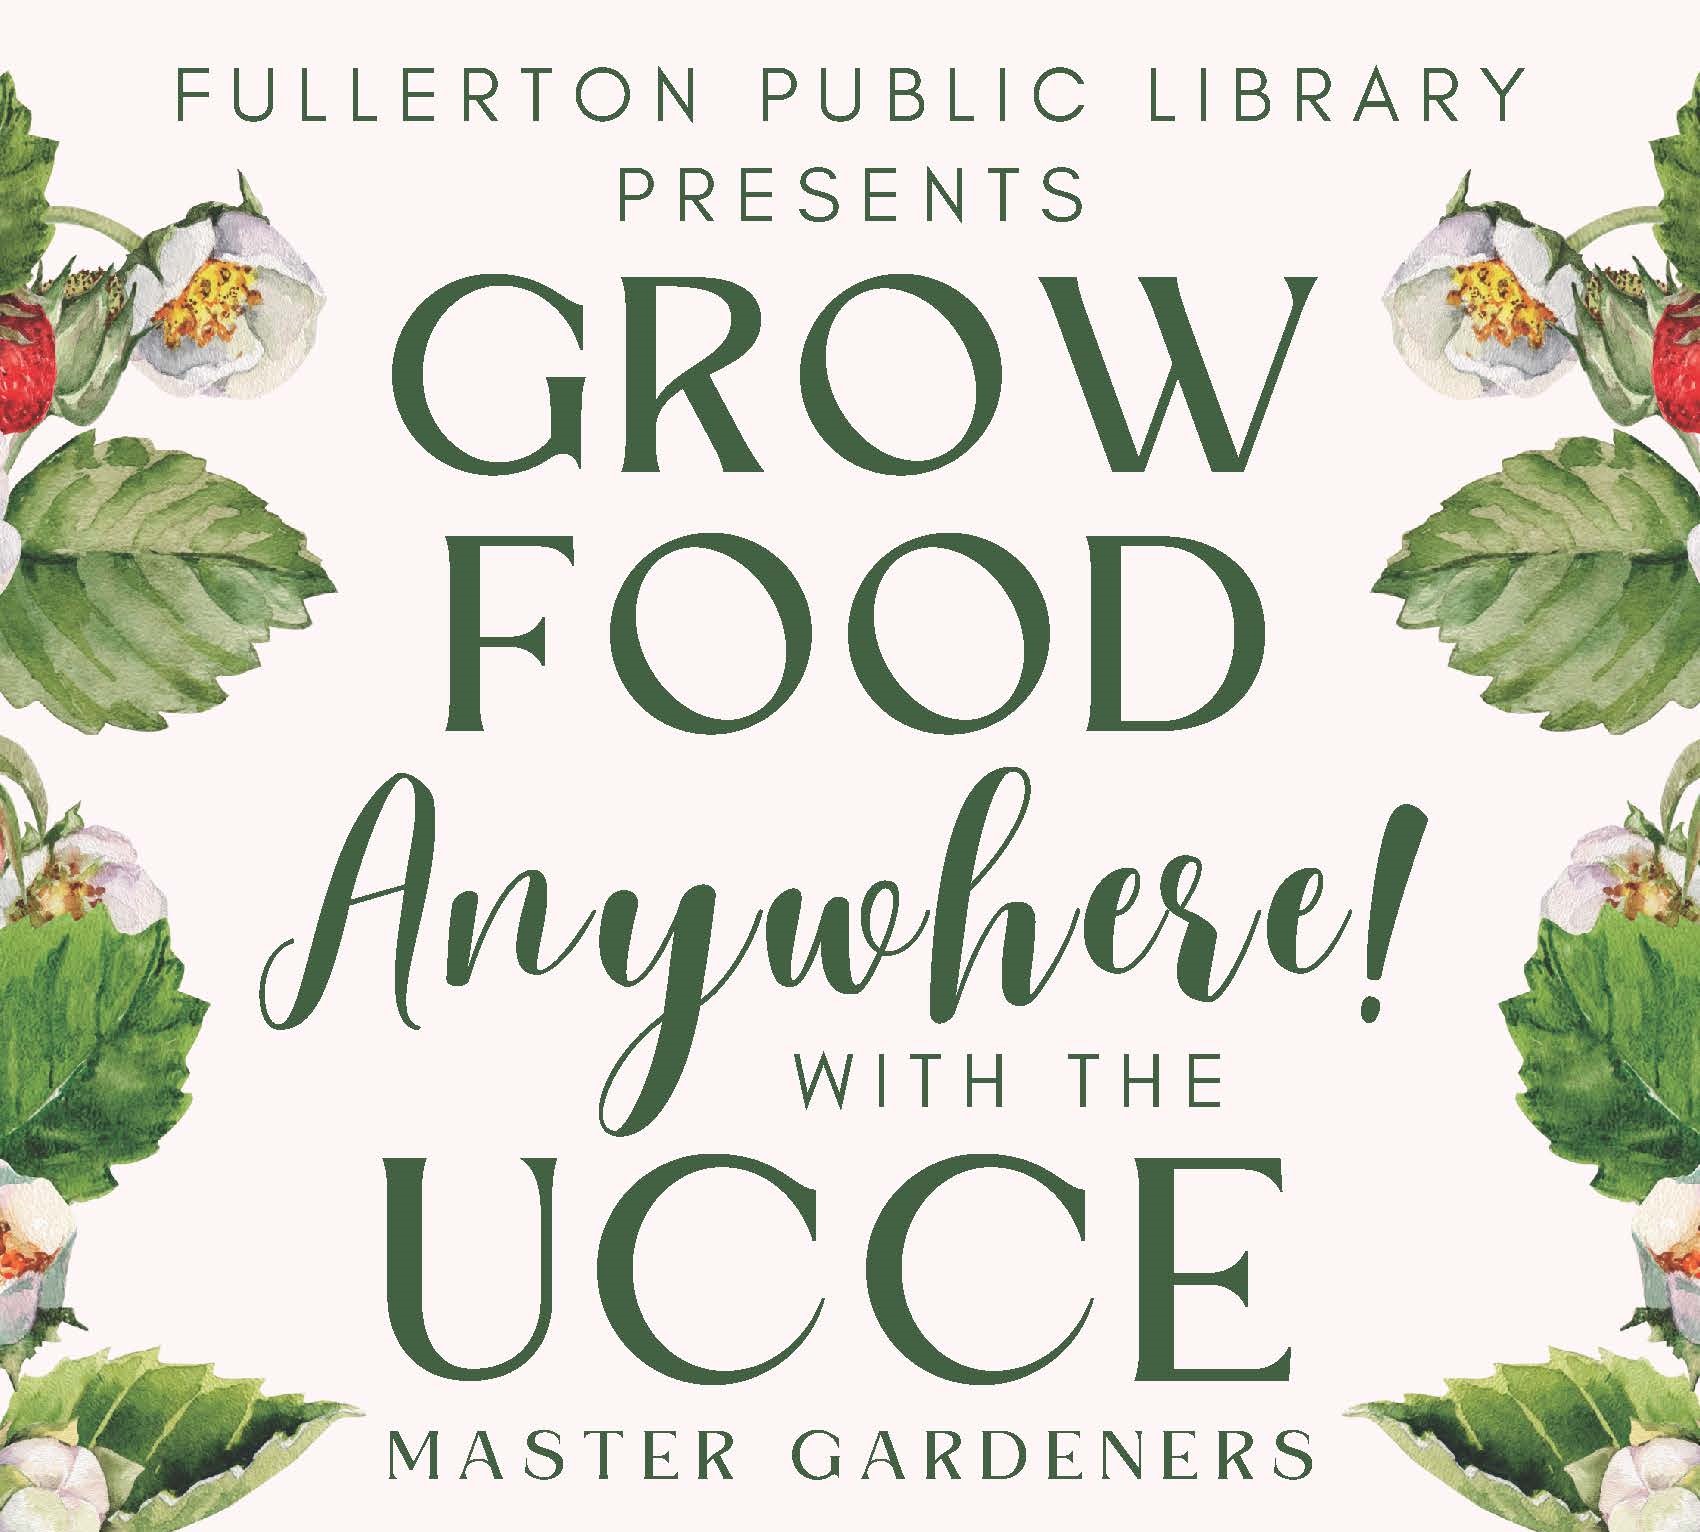 PRESS RELEASE: UCCE MASTER GARDENERS PROVIDE FULLERTON COMMUNITY WITH GARDENING EXPERTISE